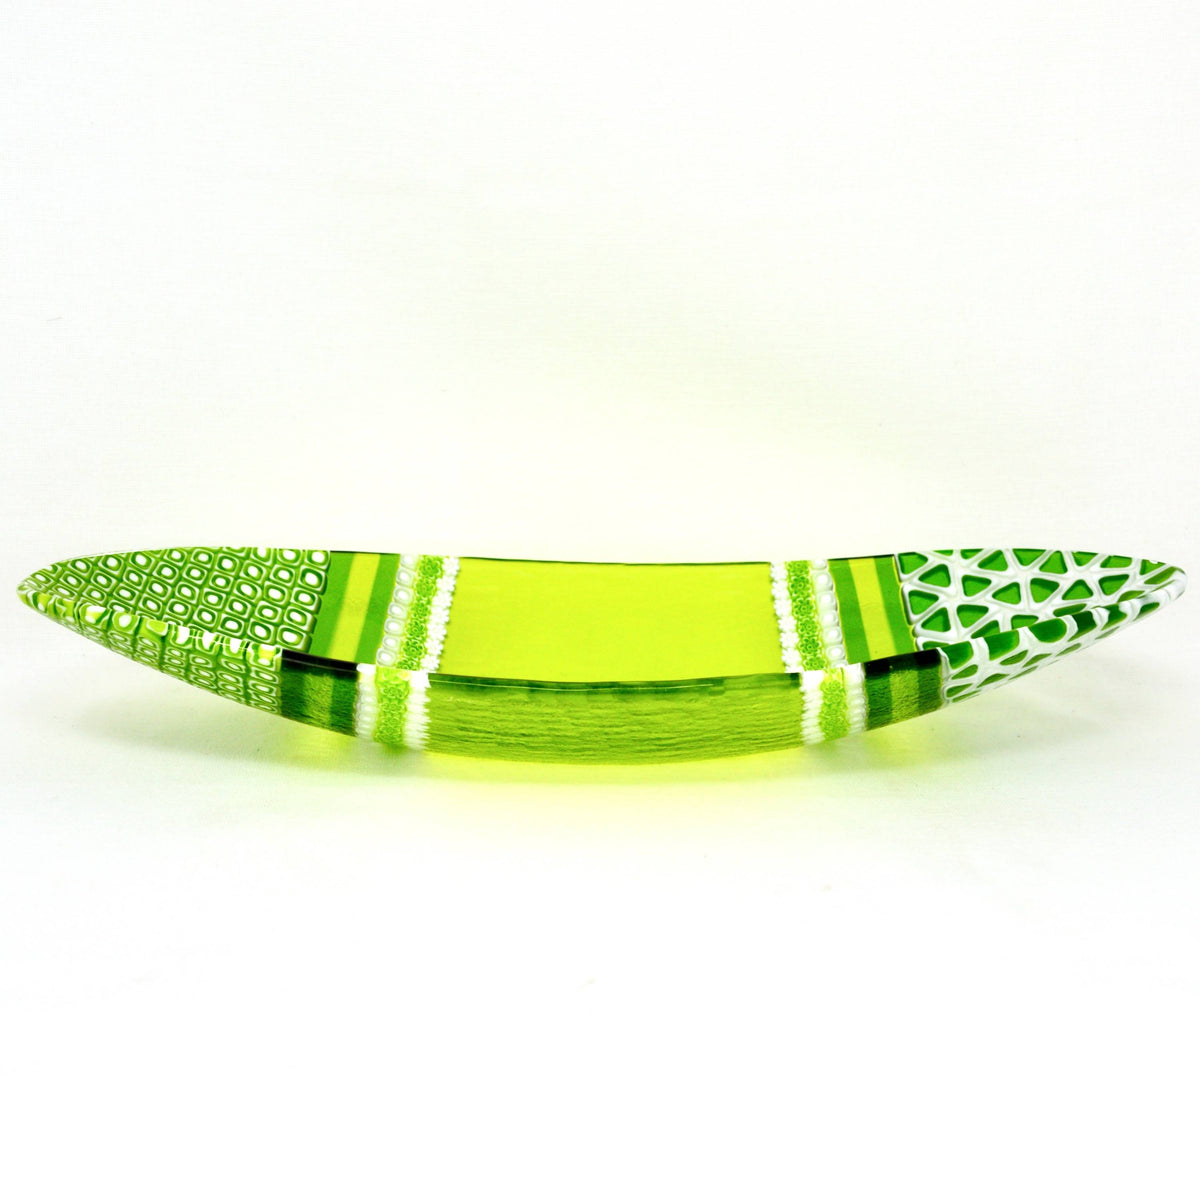 Large Oval Shaped Murano Glass Dish With Millefiori, Green, Glass Art, Made In Italy. - My Italian Decor